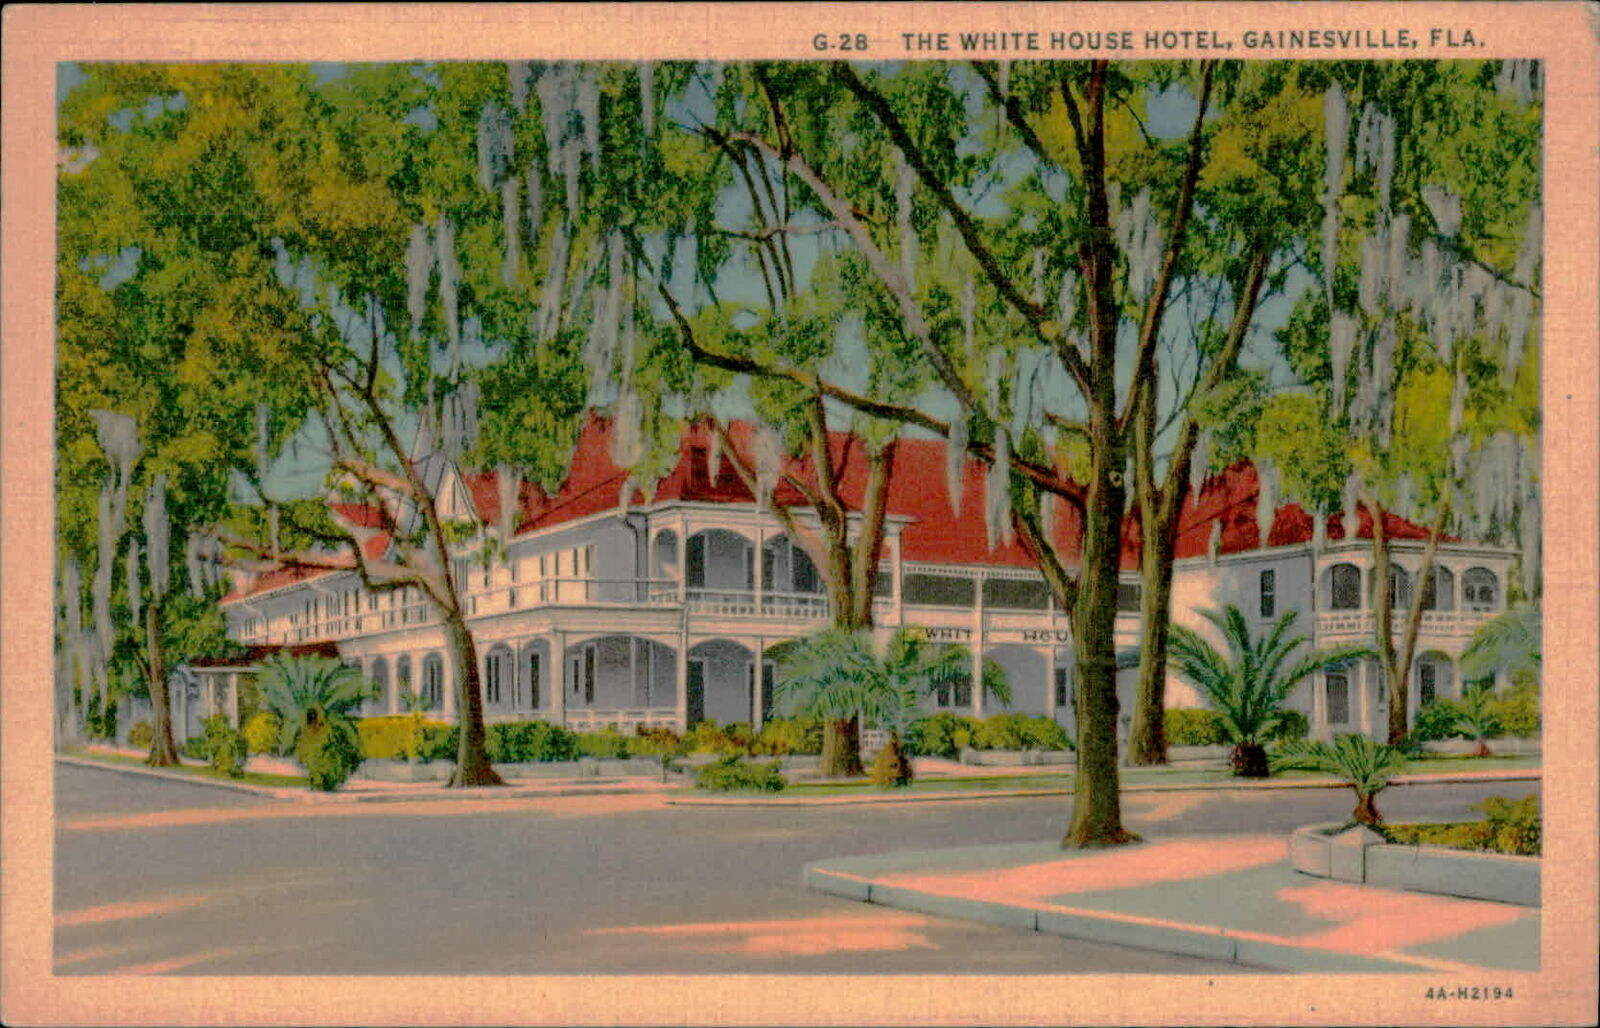 Postcard: G.28 THE WHITE HOUSE HOTEL, GAINESVILLE, FLA. WHIT 262 4A-H2